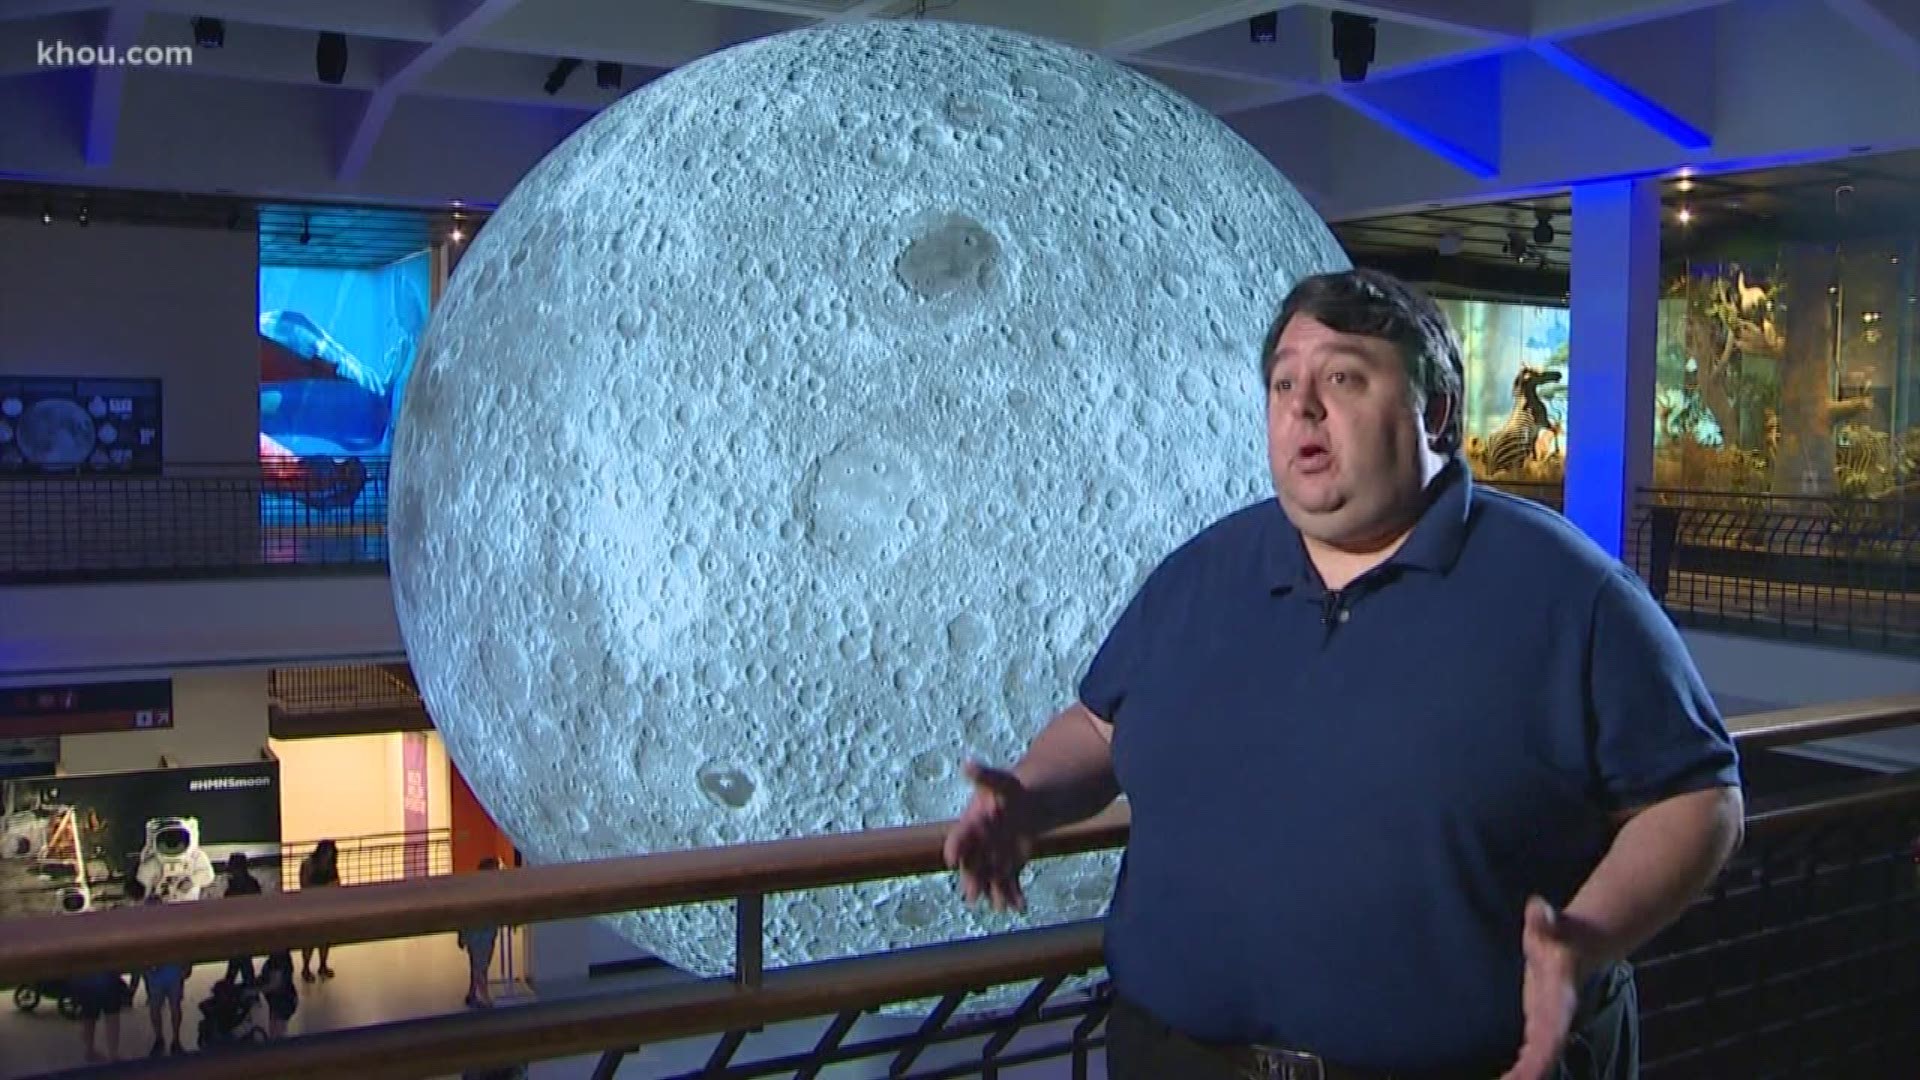 Meet the Houston man who makes sure Hollywood gets it right when it comes to the moon and space travel.